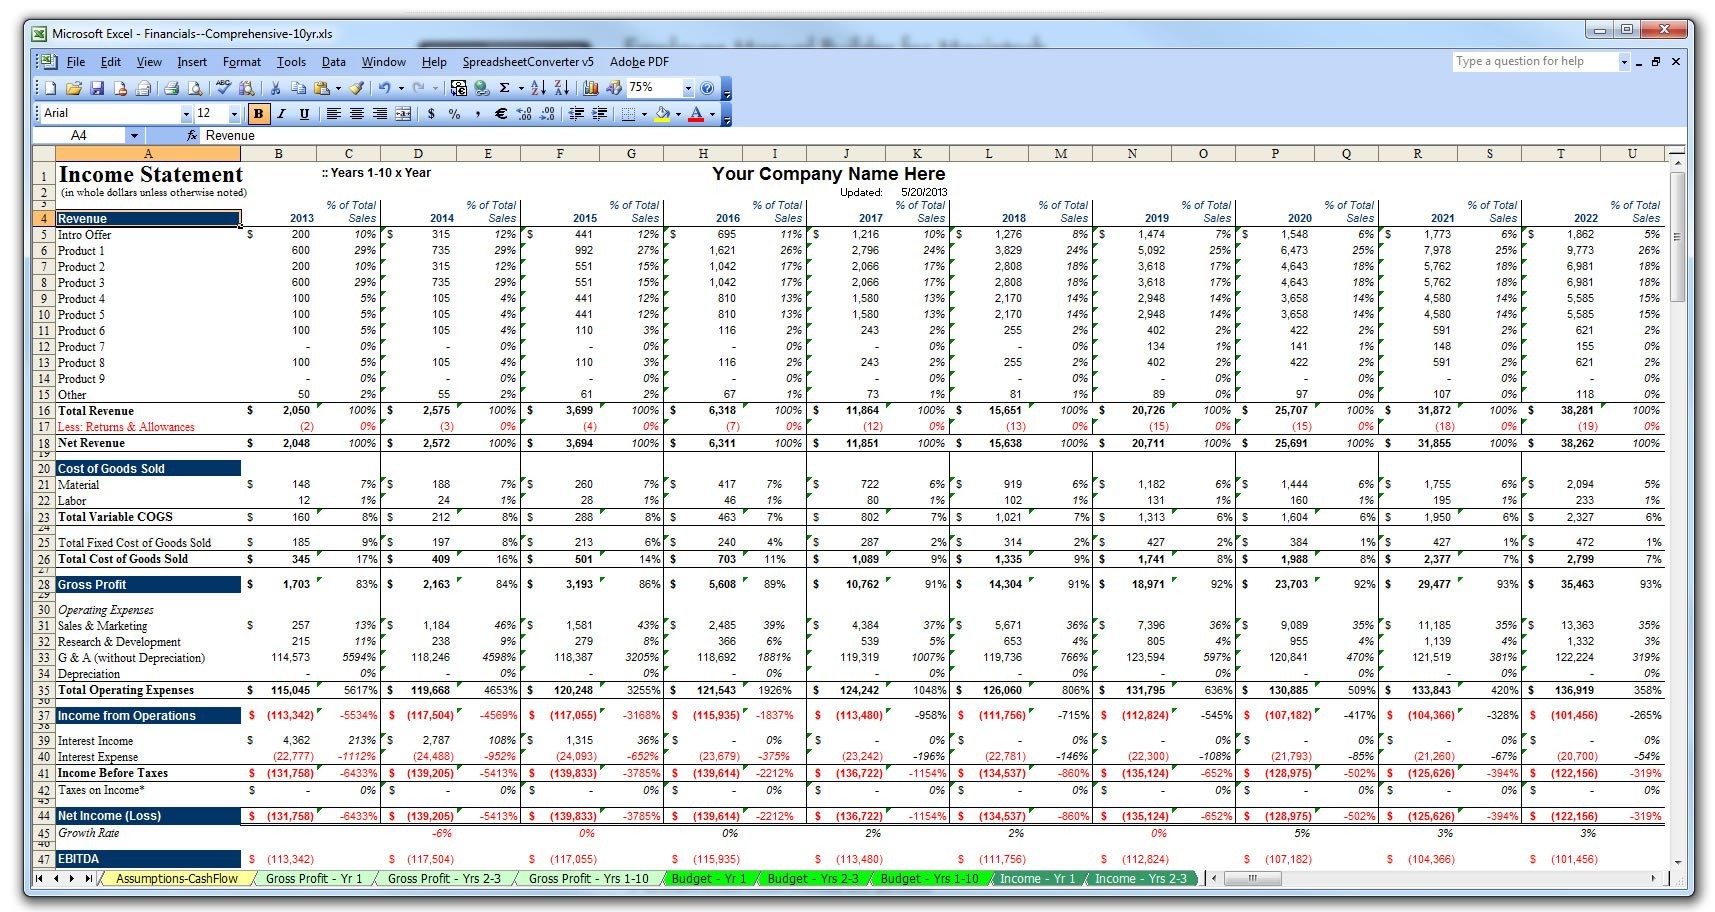 10 Year Business Plan Financial Budget Projection Model In Excel Document Projections Template